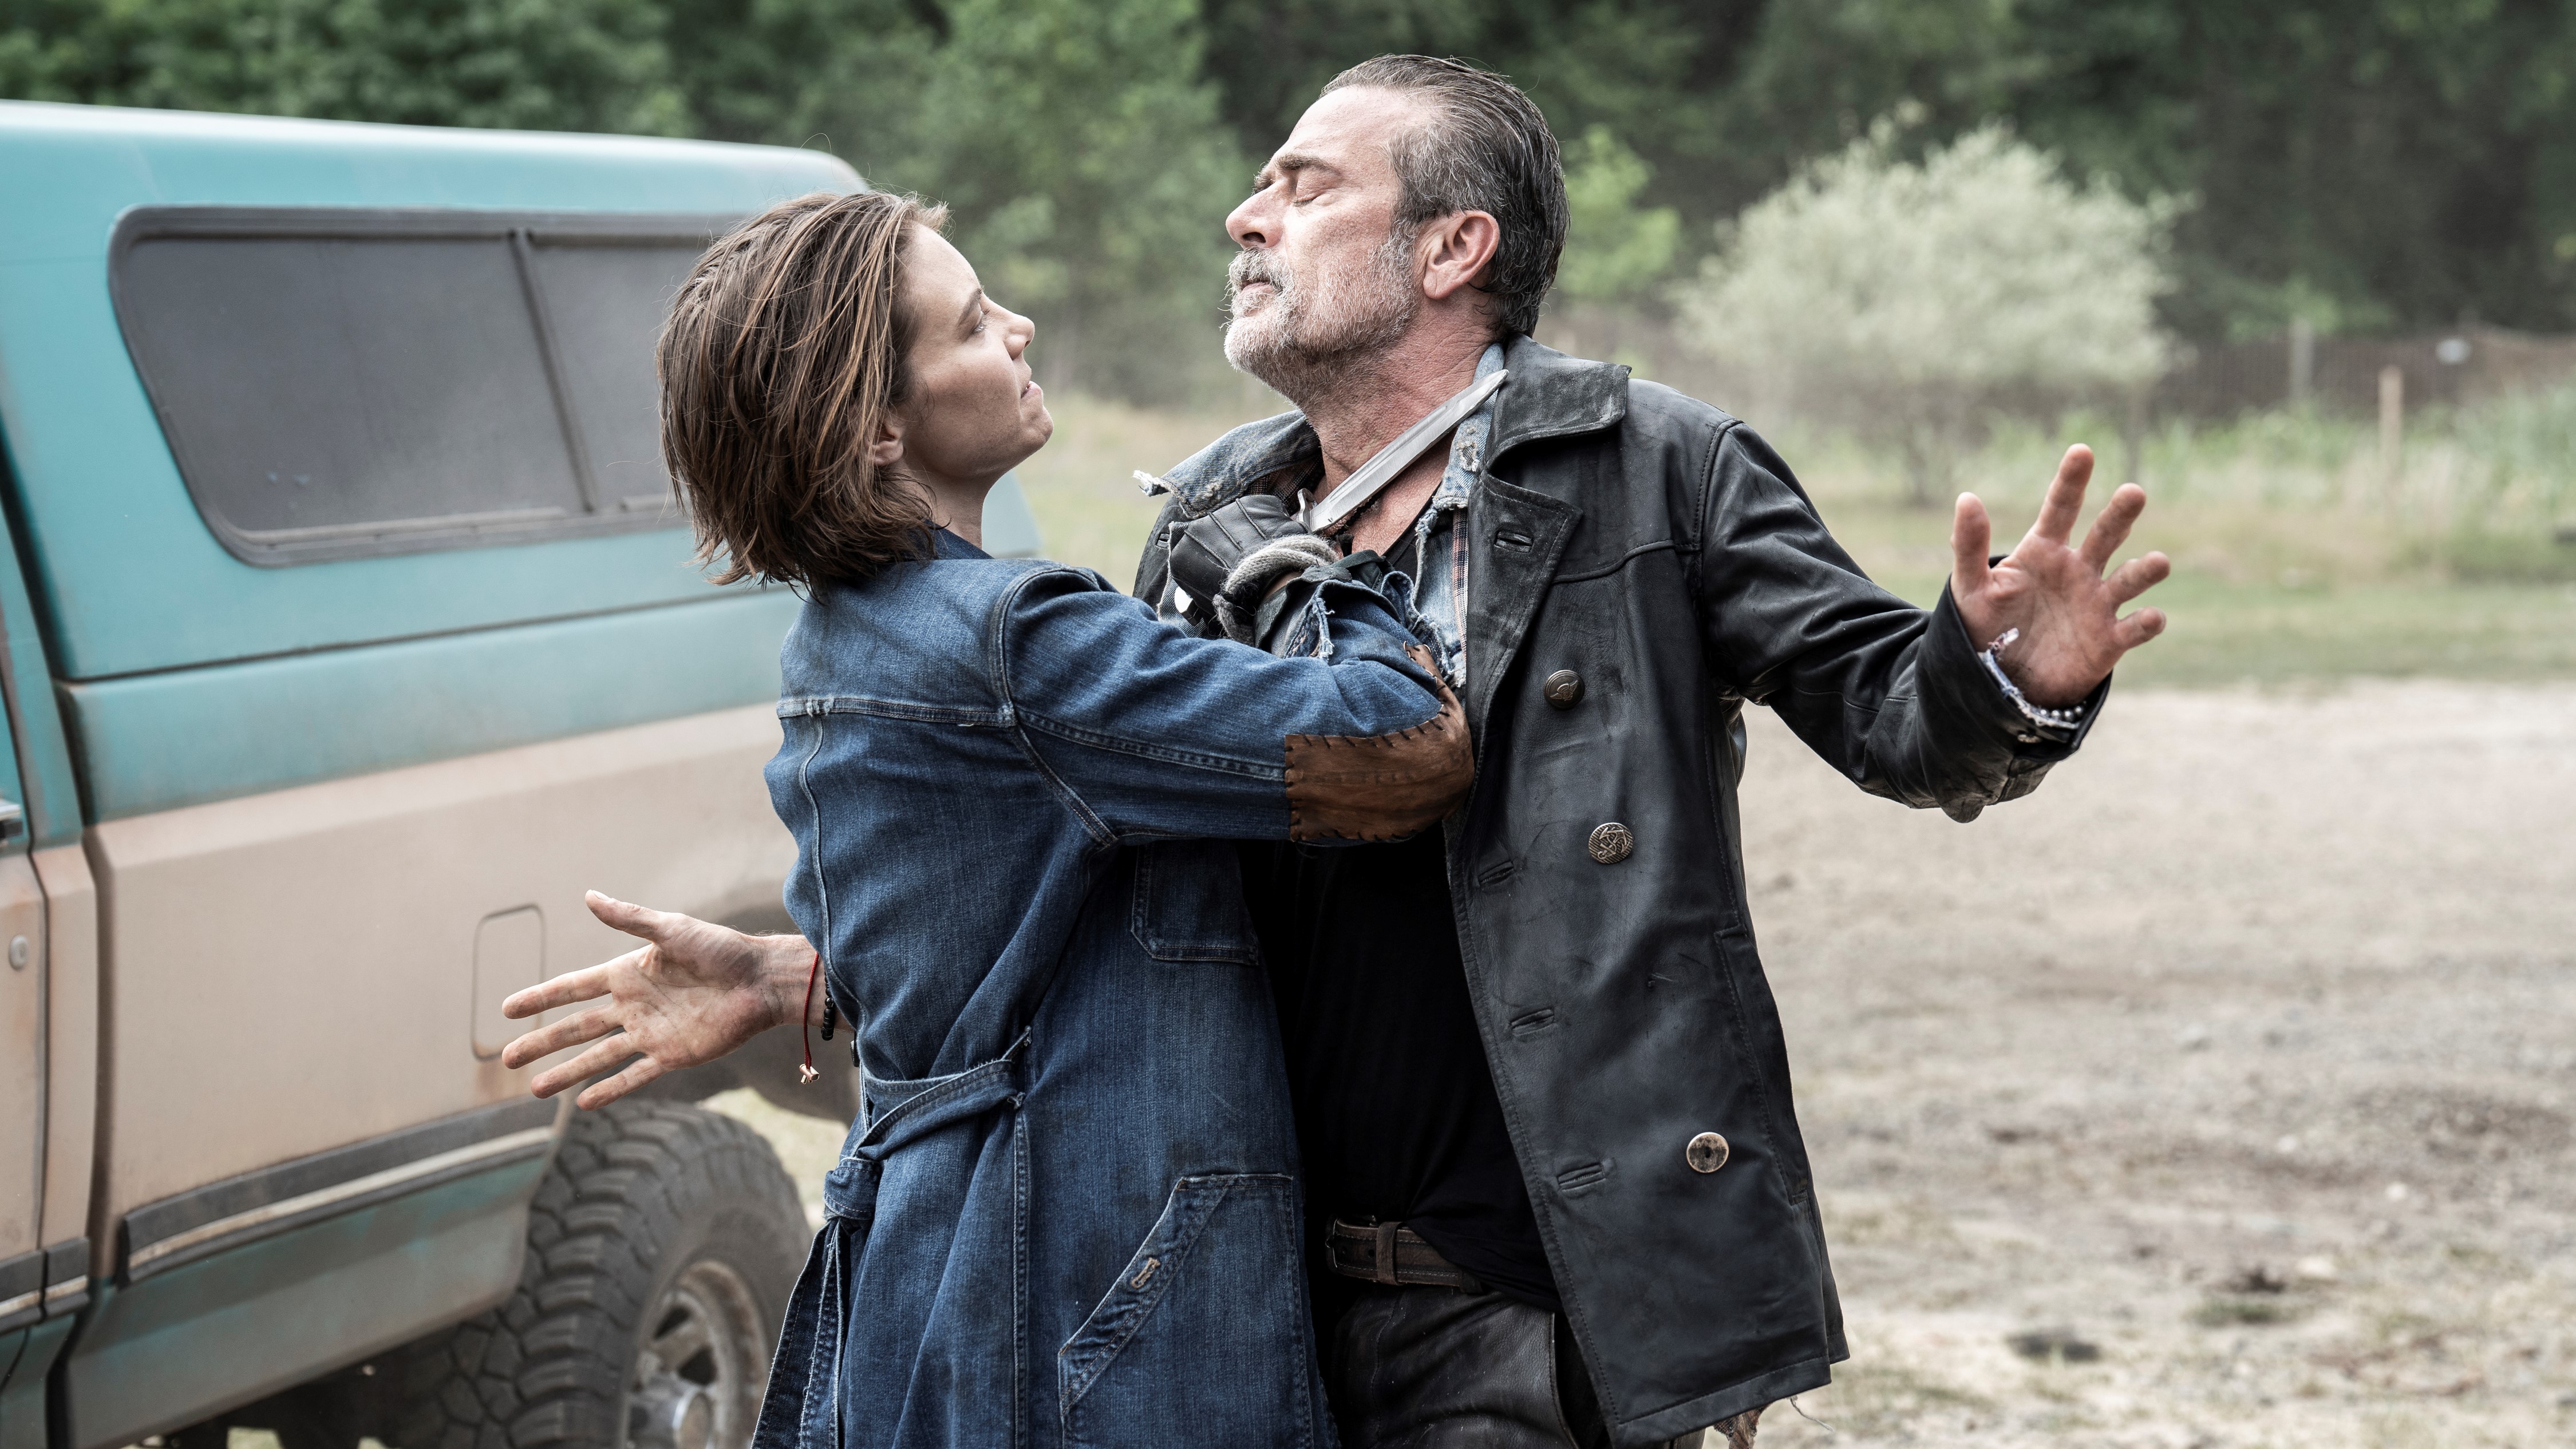 The Walking Dead: Dead City - AMC Series - Where To Watch